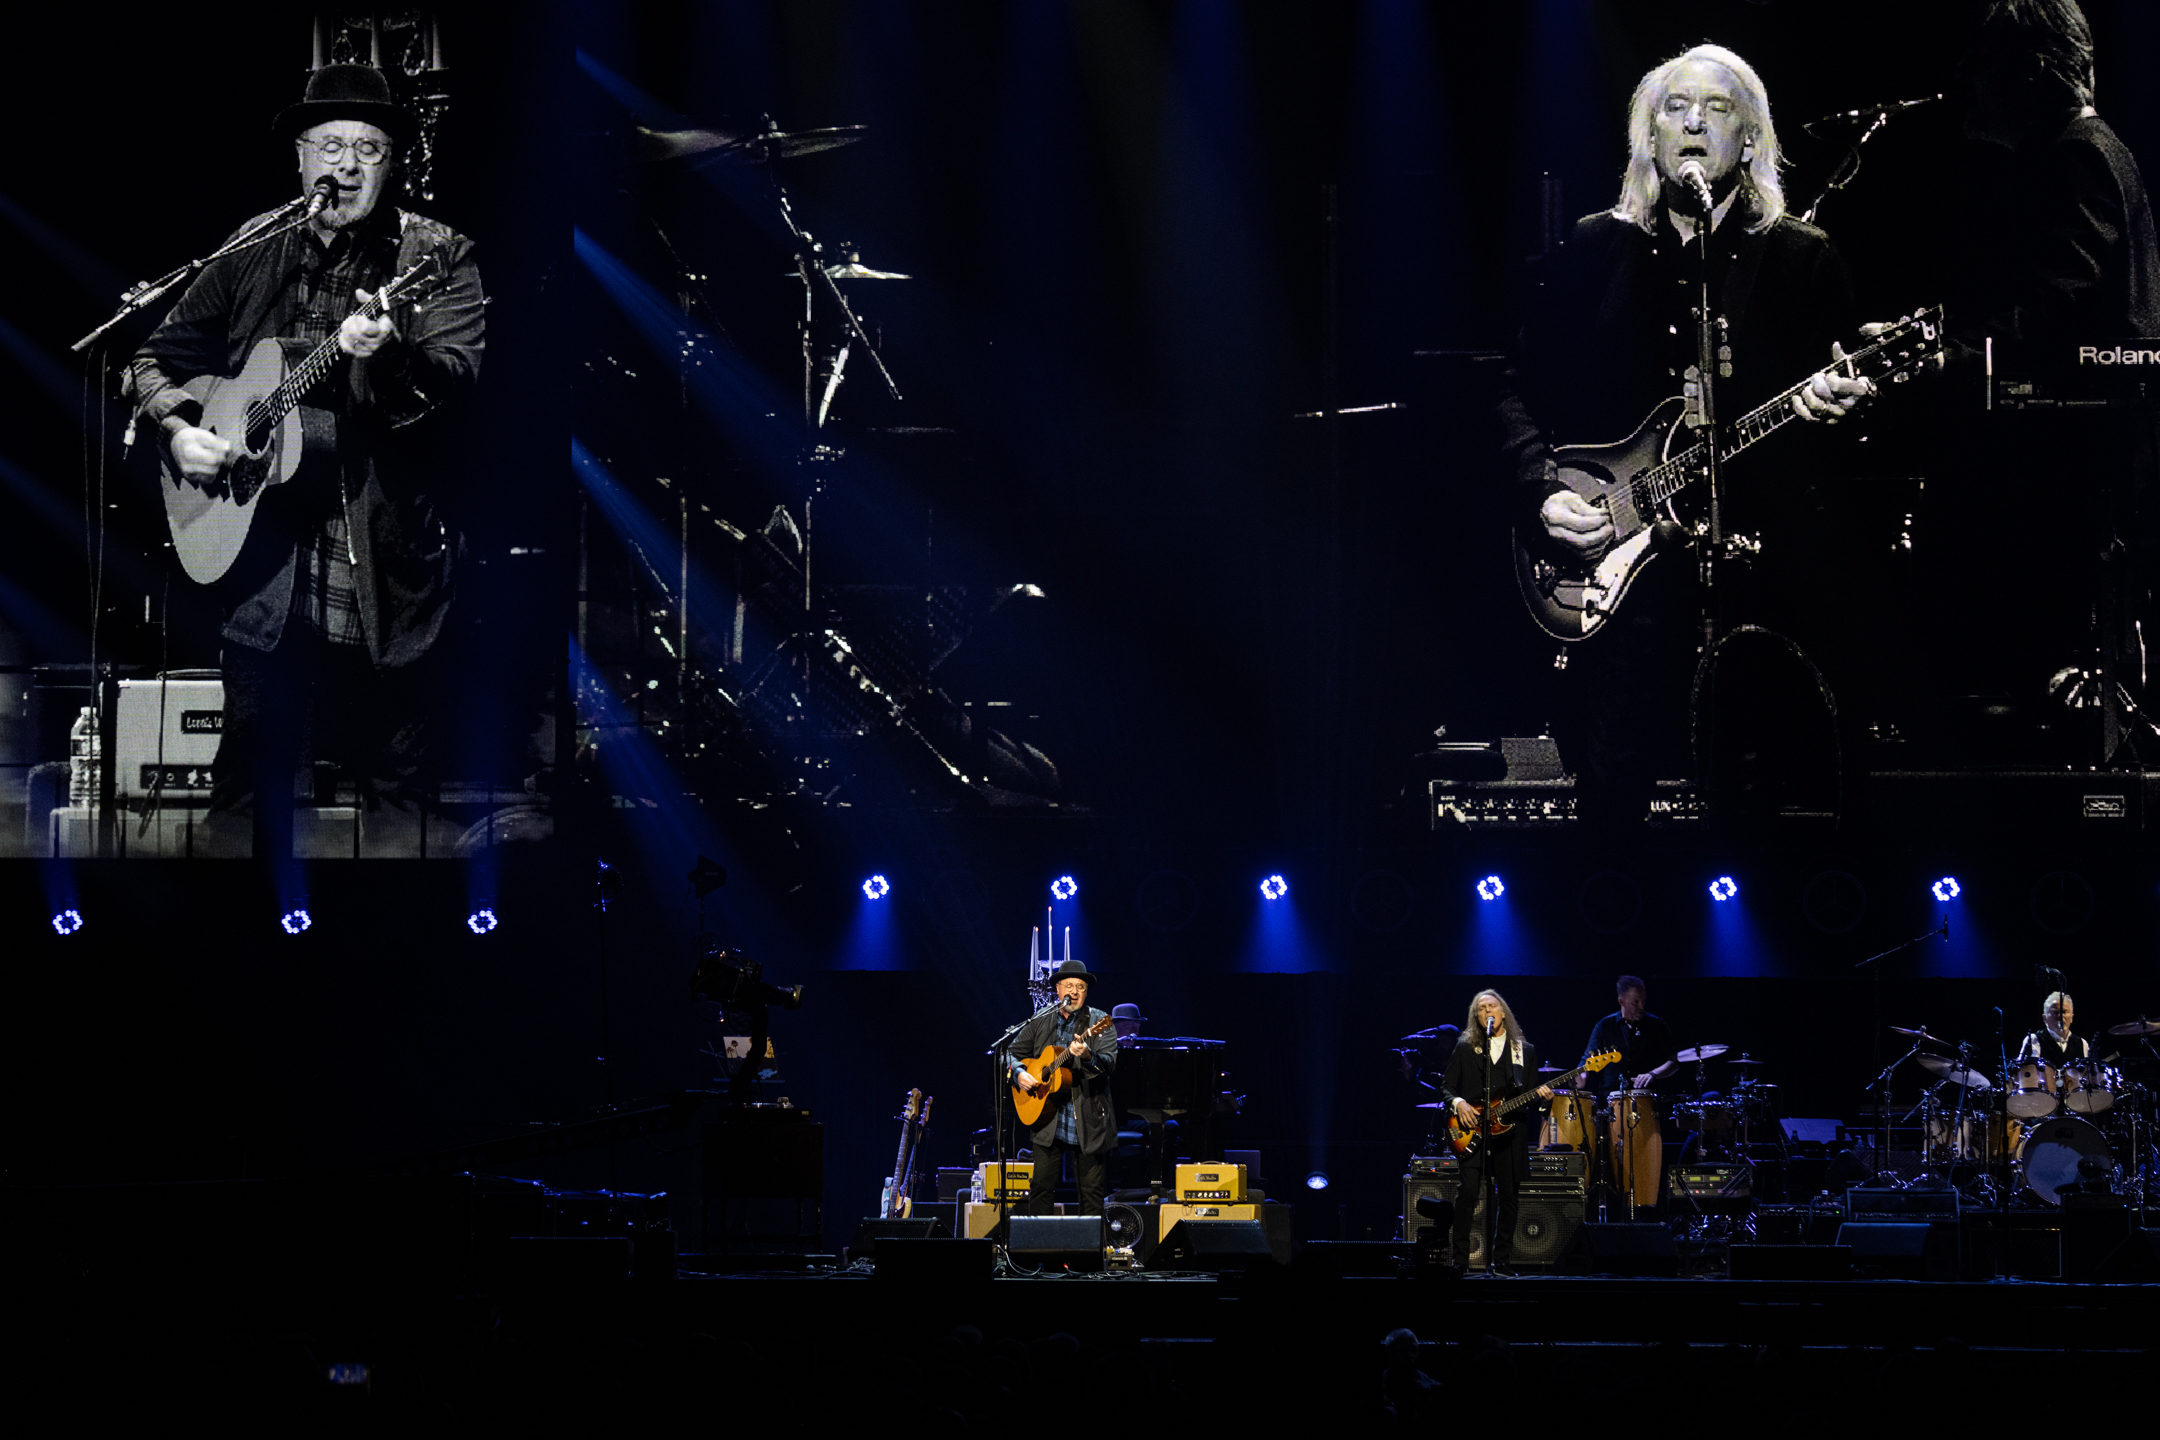 The Eagles perform at the Prudential Center